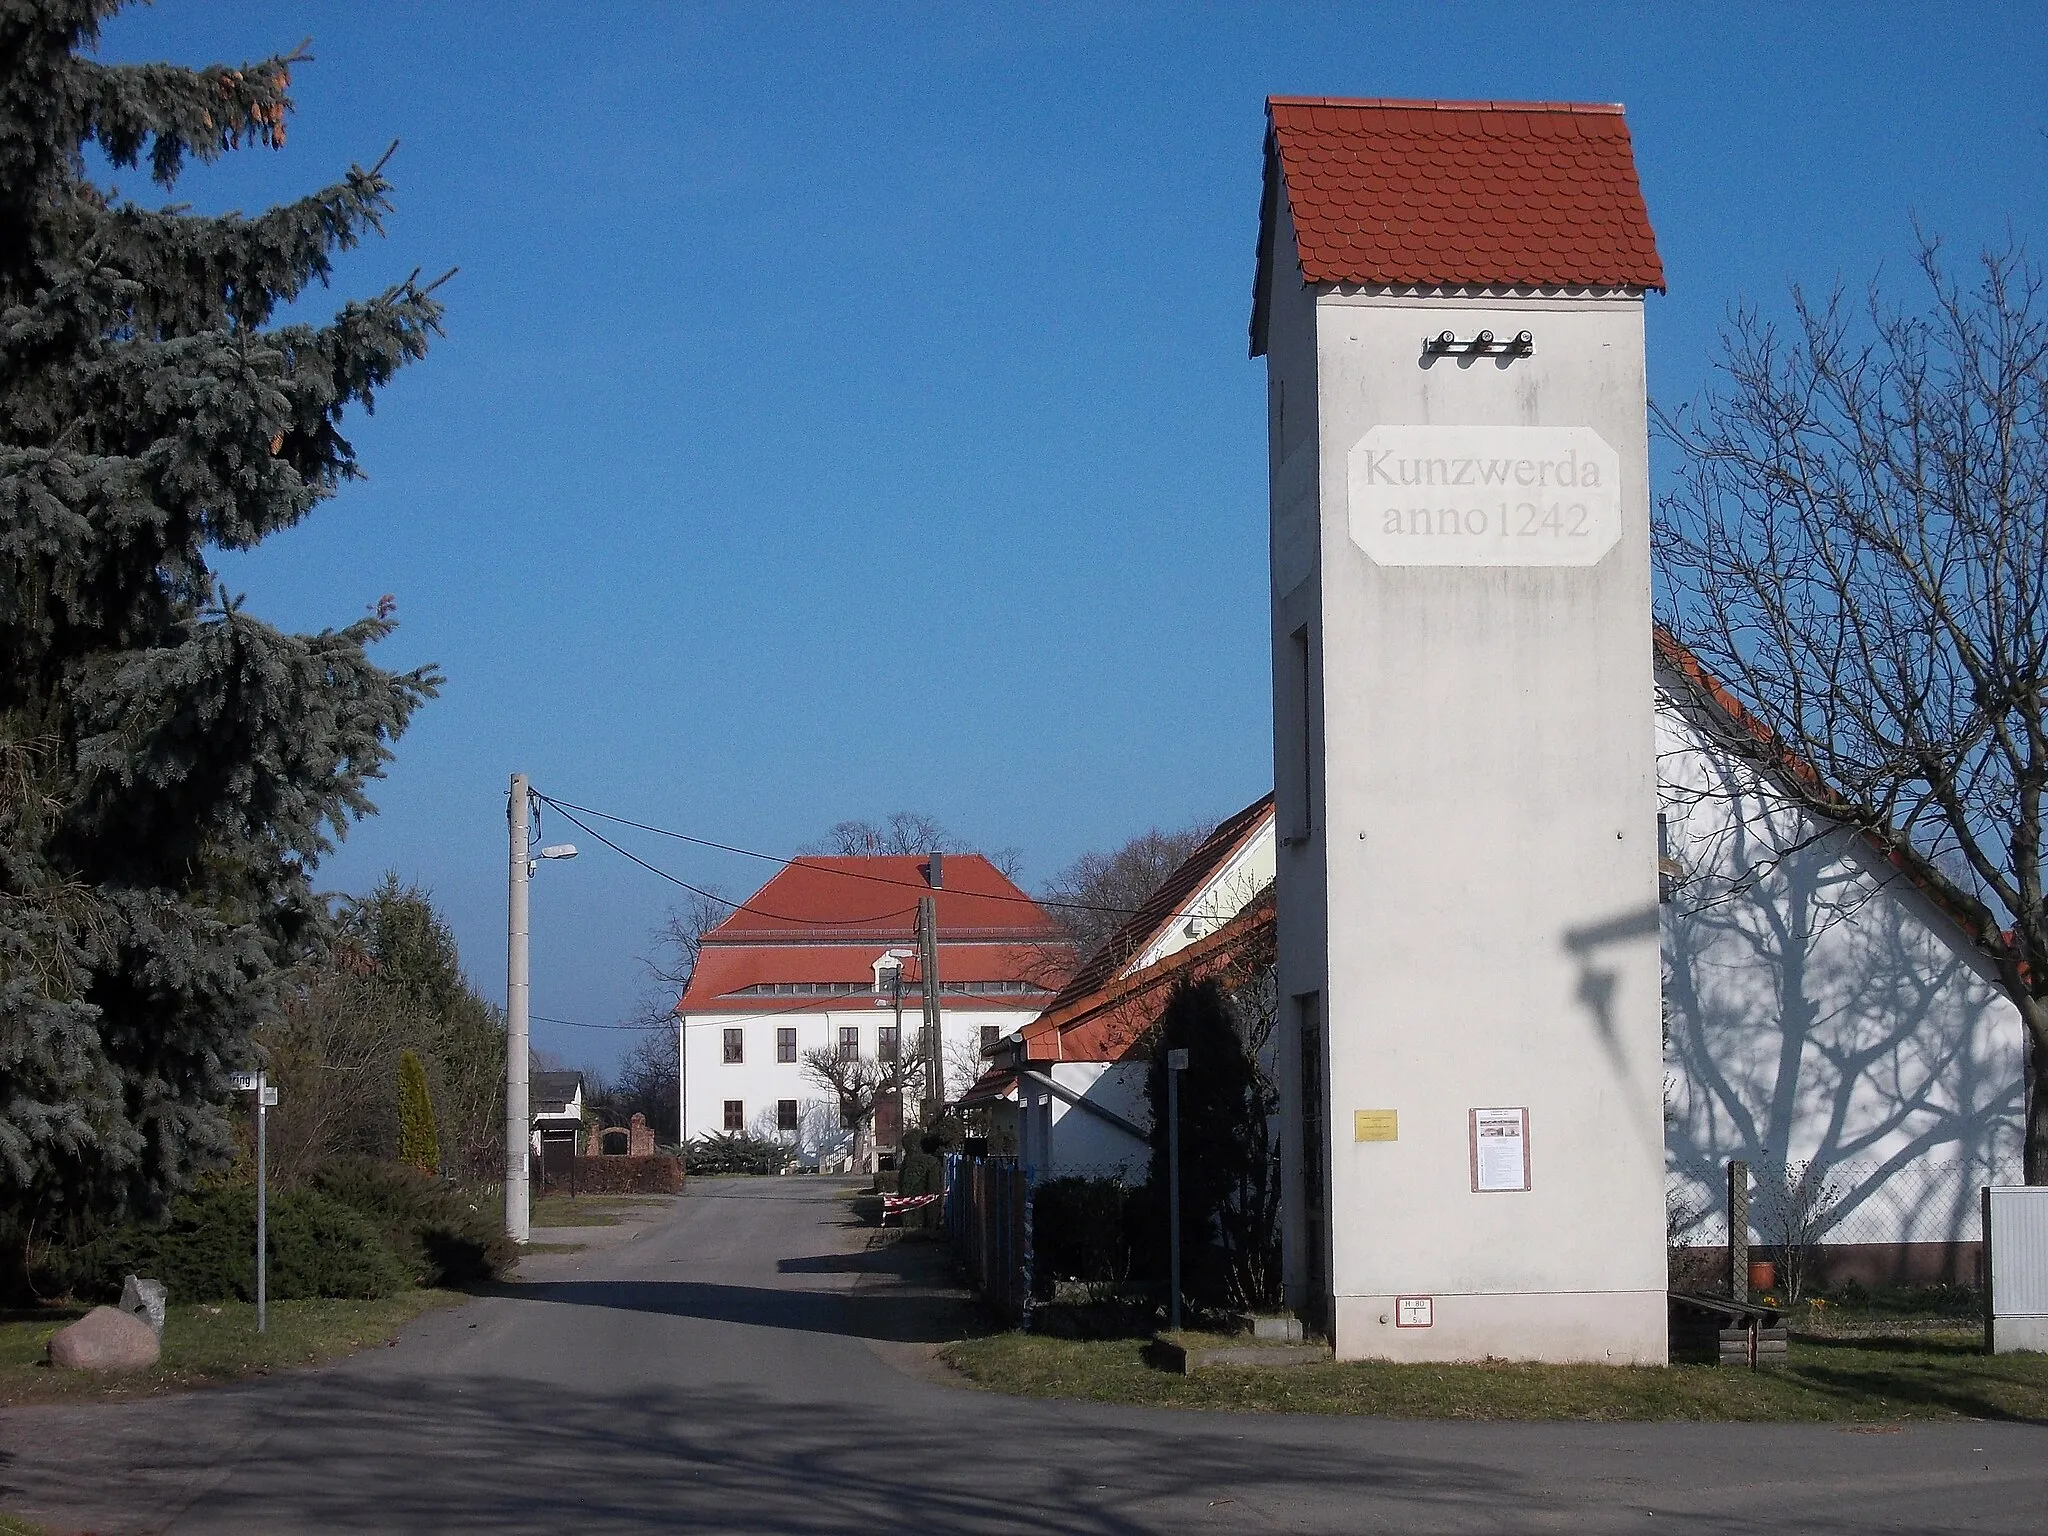 Photo showing: Distribution substation and manor house in Kunzwerda (Torgau, Nordsachsen district, Saxony)